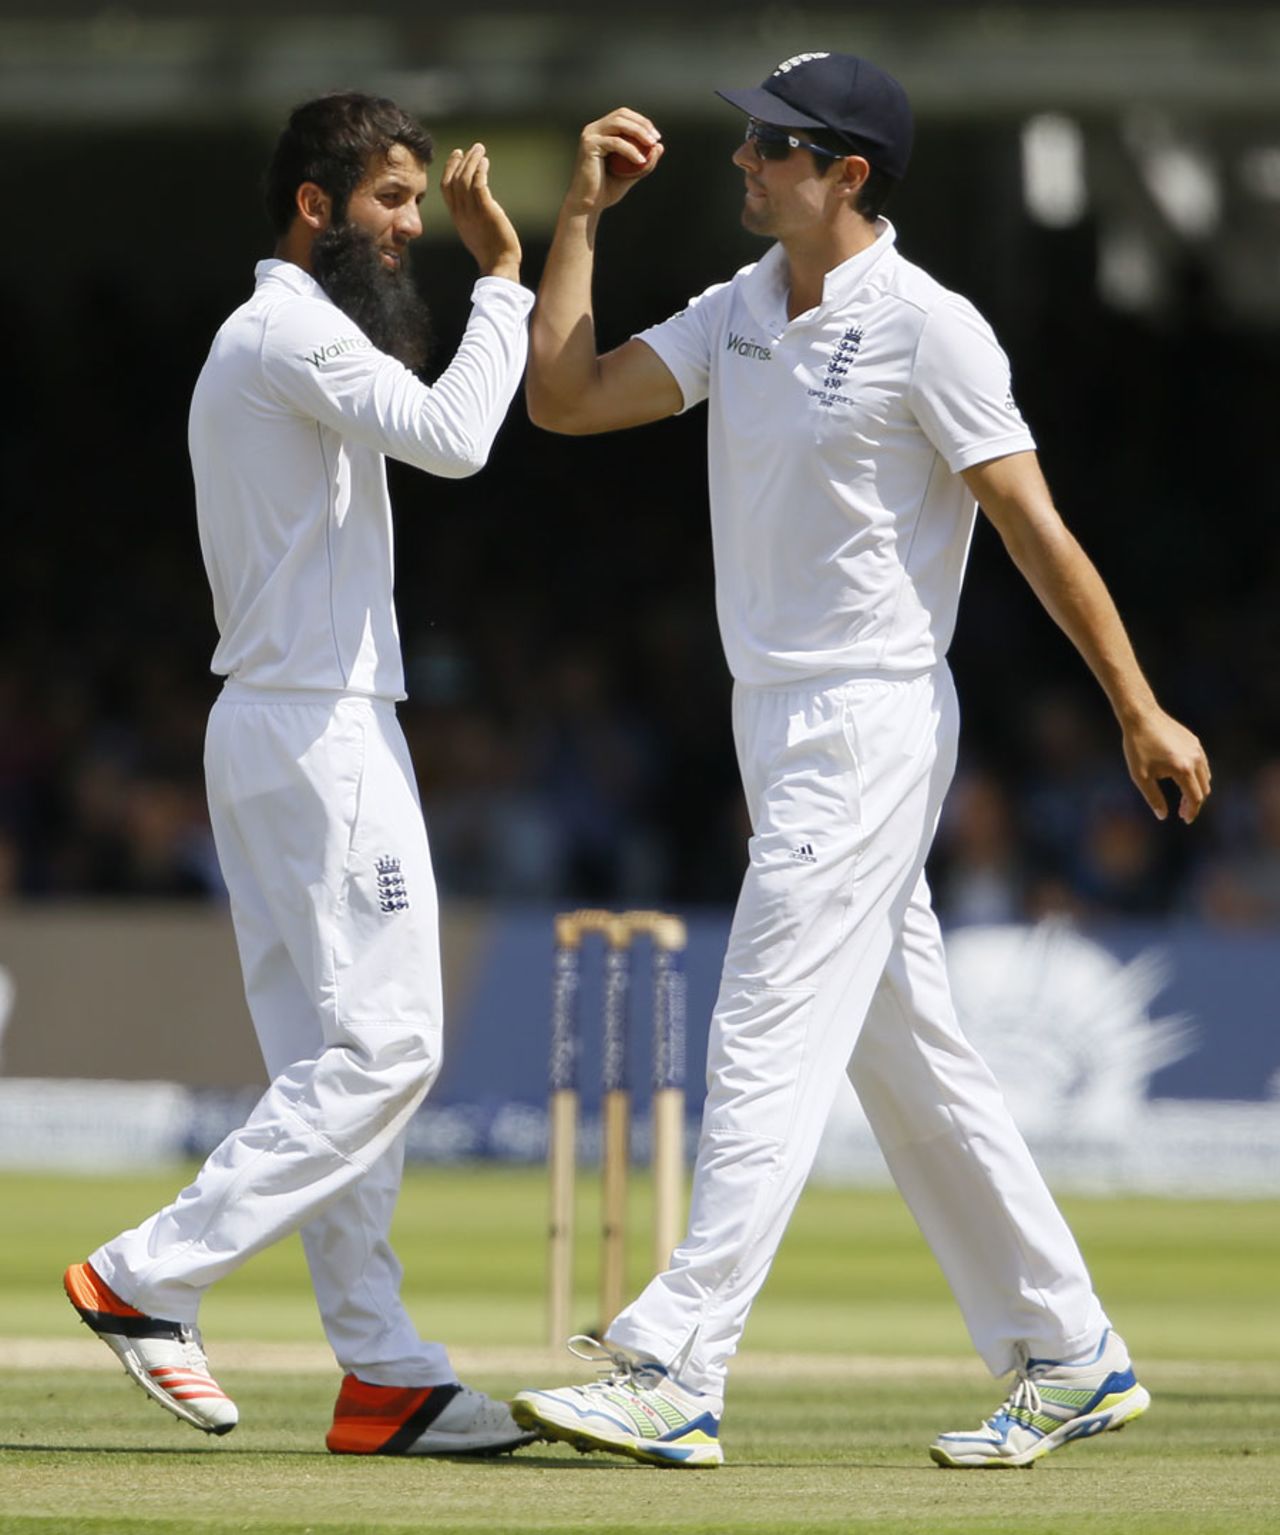 Moeen Ali removed David Warner thanks to Alastair Cook's catch, England v Australia, 2nd Investec Ashes Test, Lord's, 4th day, July 19, 2015